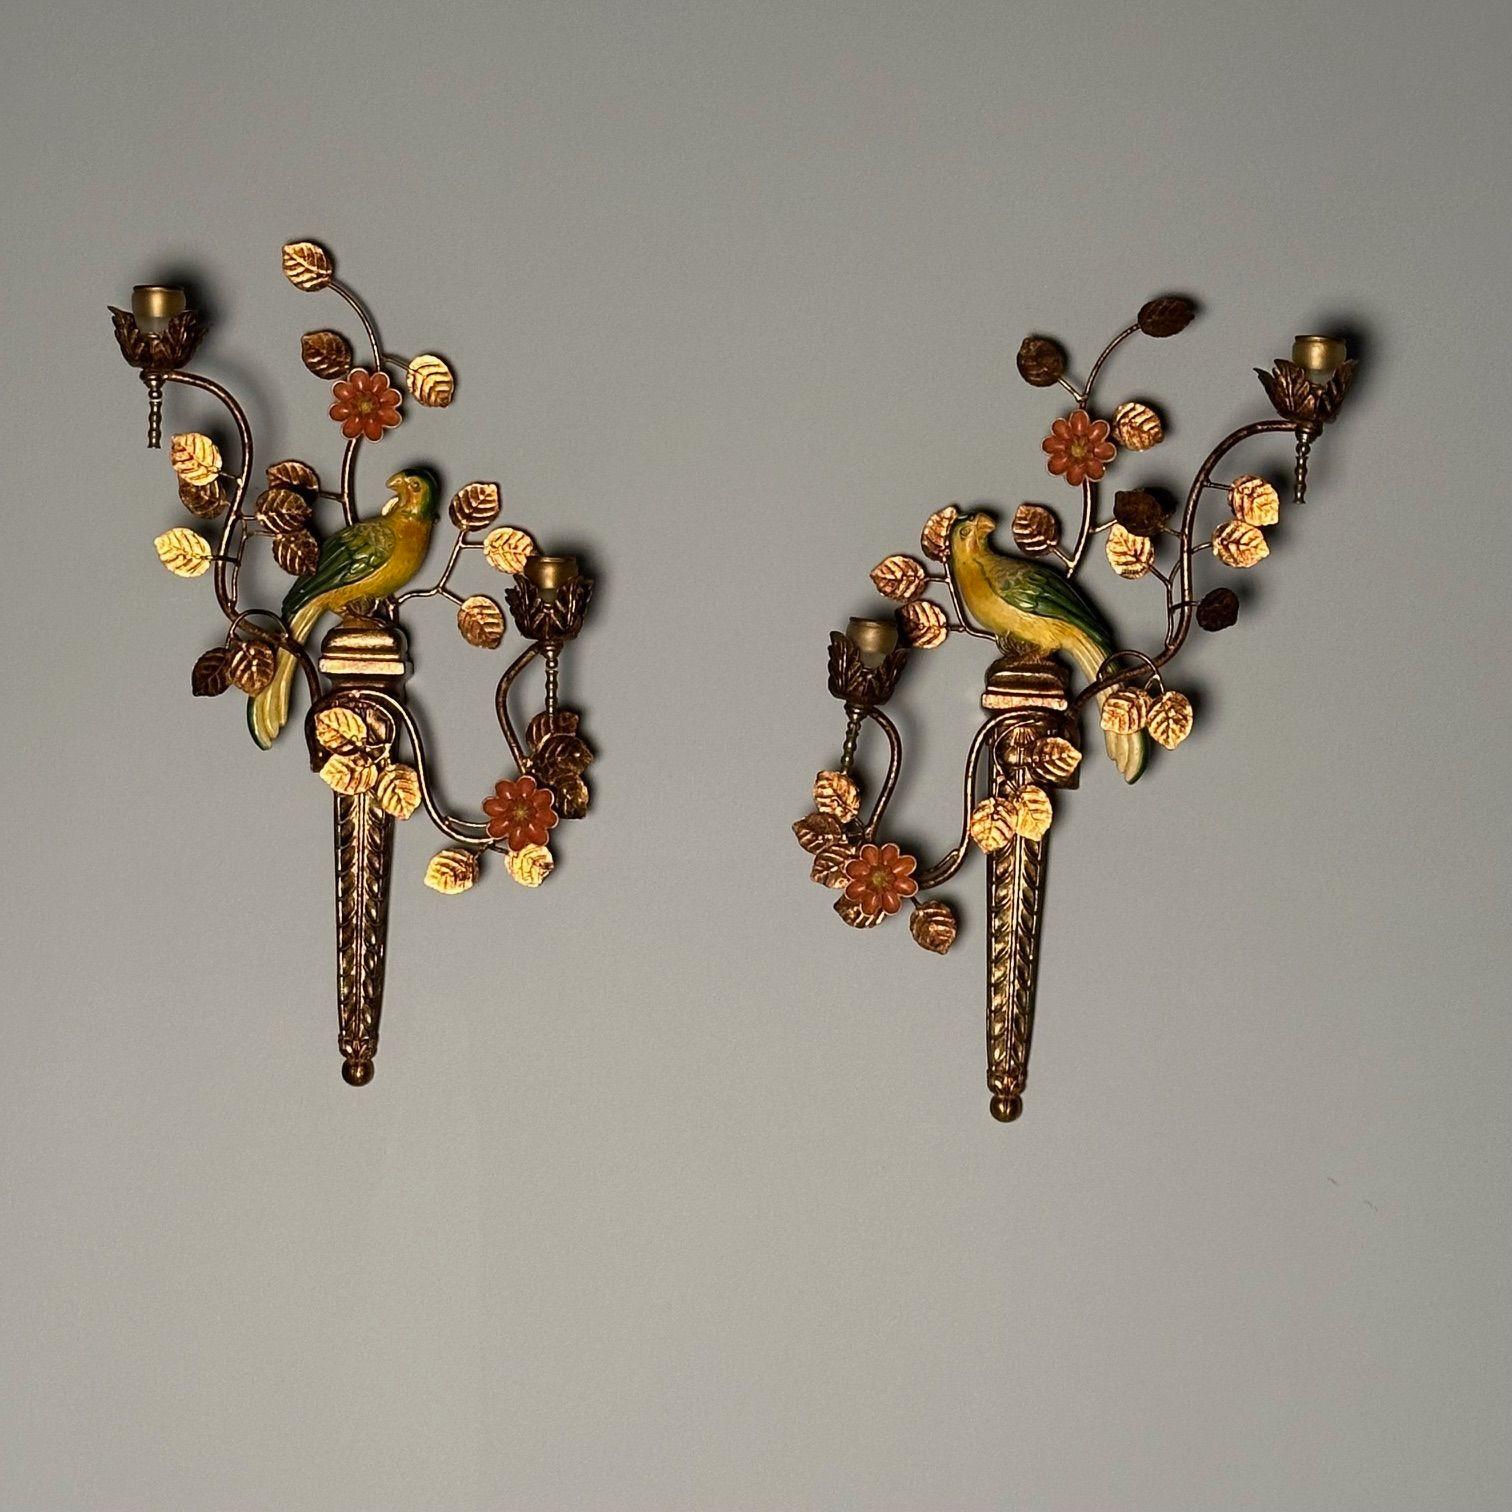 Pair of Mid Century Modern Colorful Parrot Wall Sconces / Lights, Hand Painted 12